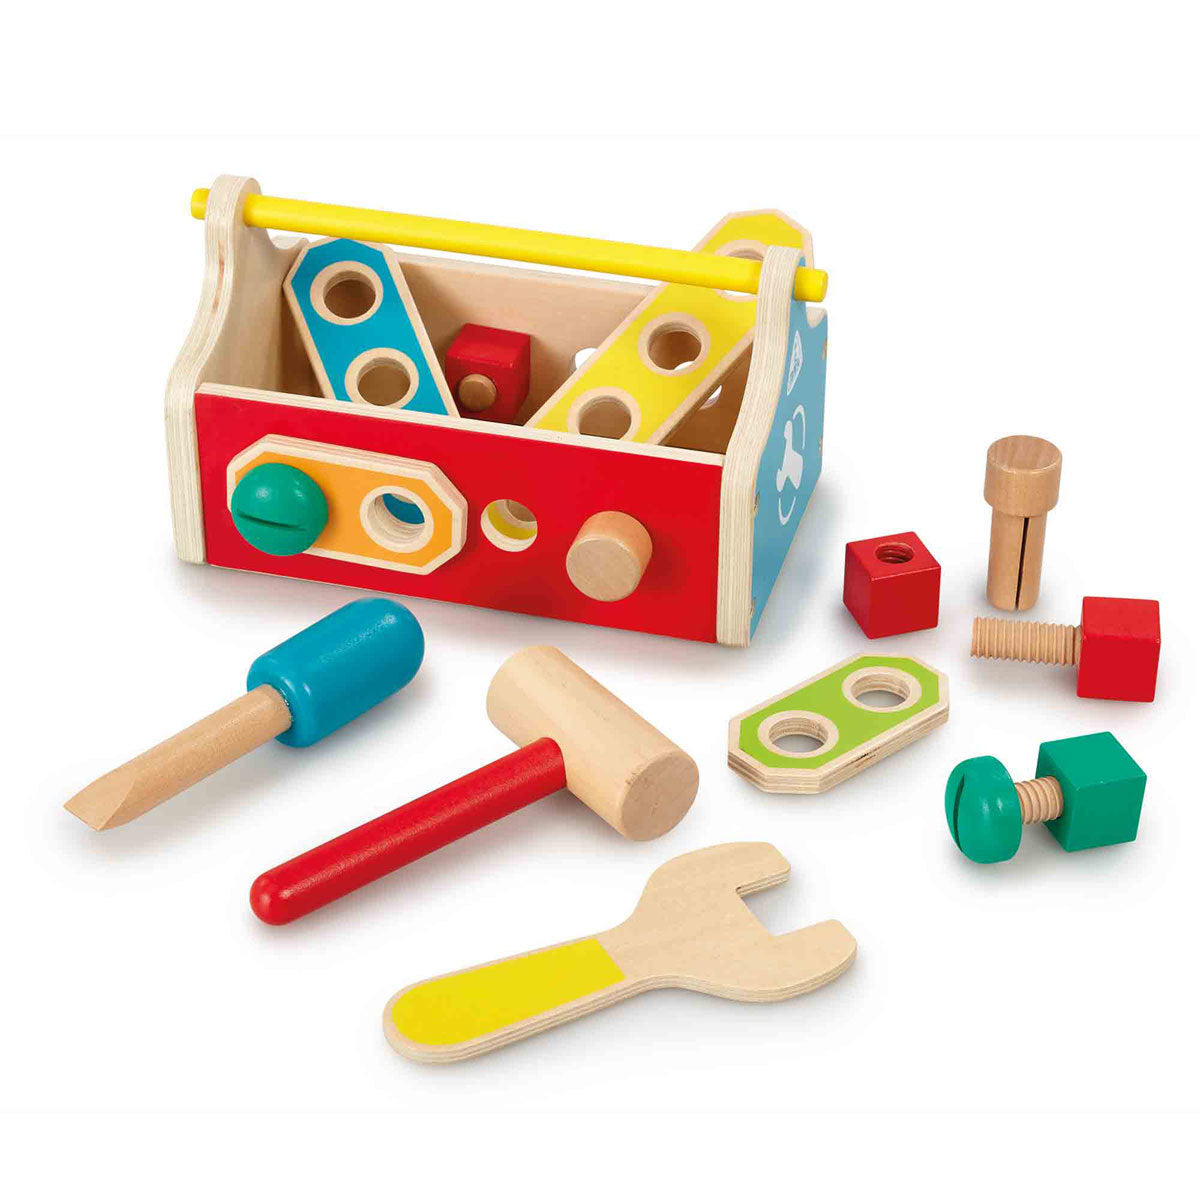 Early Learning Centre My Little Wooden Toolbox Playset